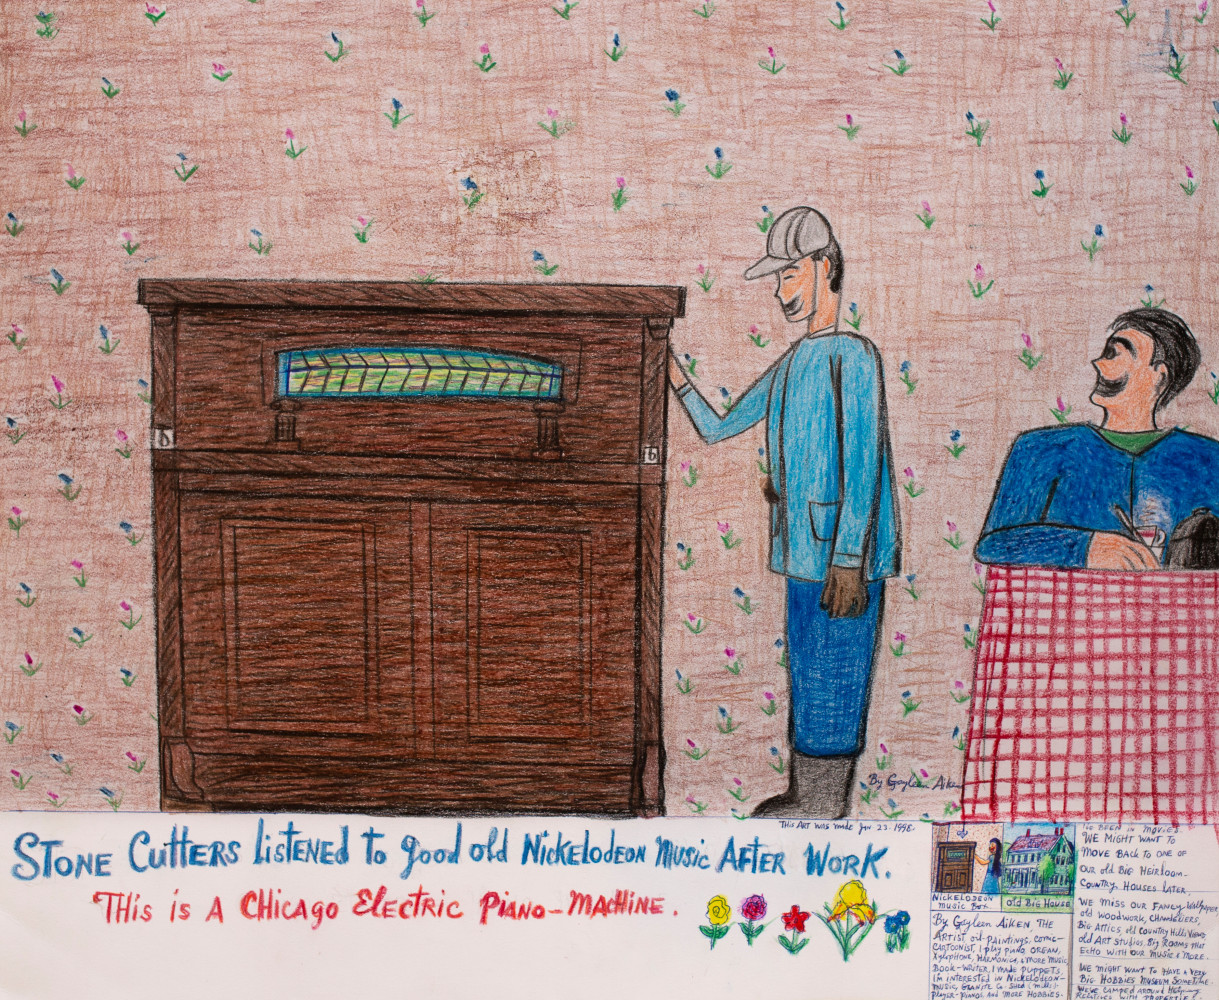 Stone Cutters Listened to good old Nickelodeon music After Work, 1998
Colored pencil, ballpoint pen, and crayon on paper
14 x 17 inches